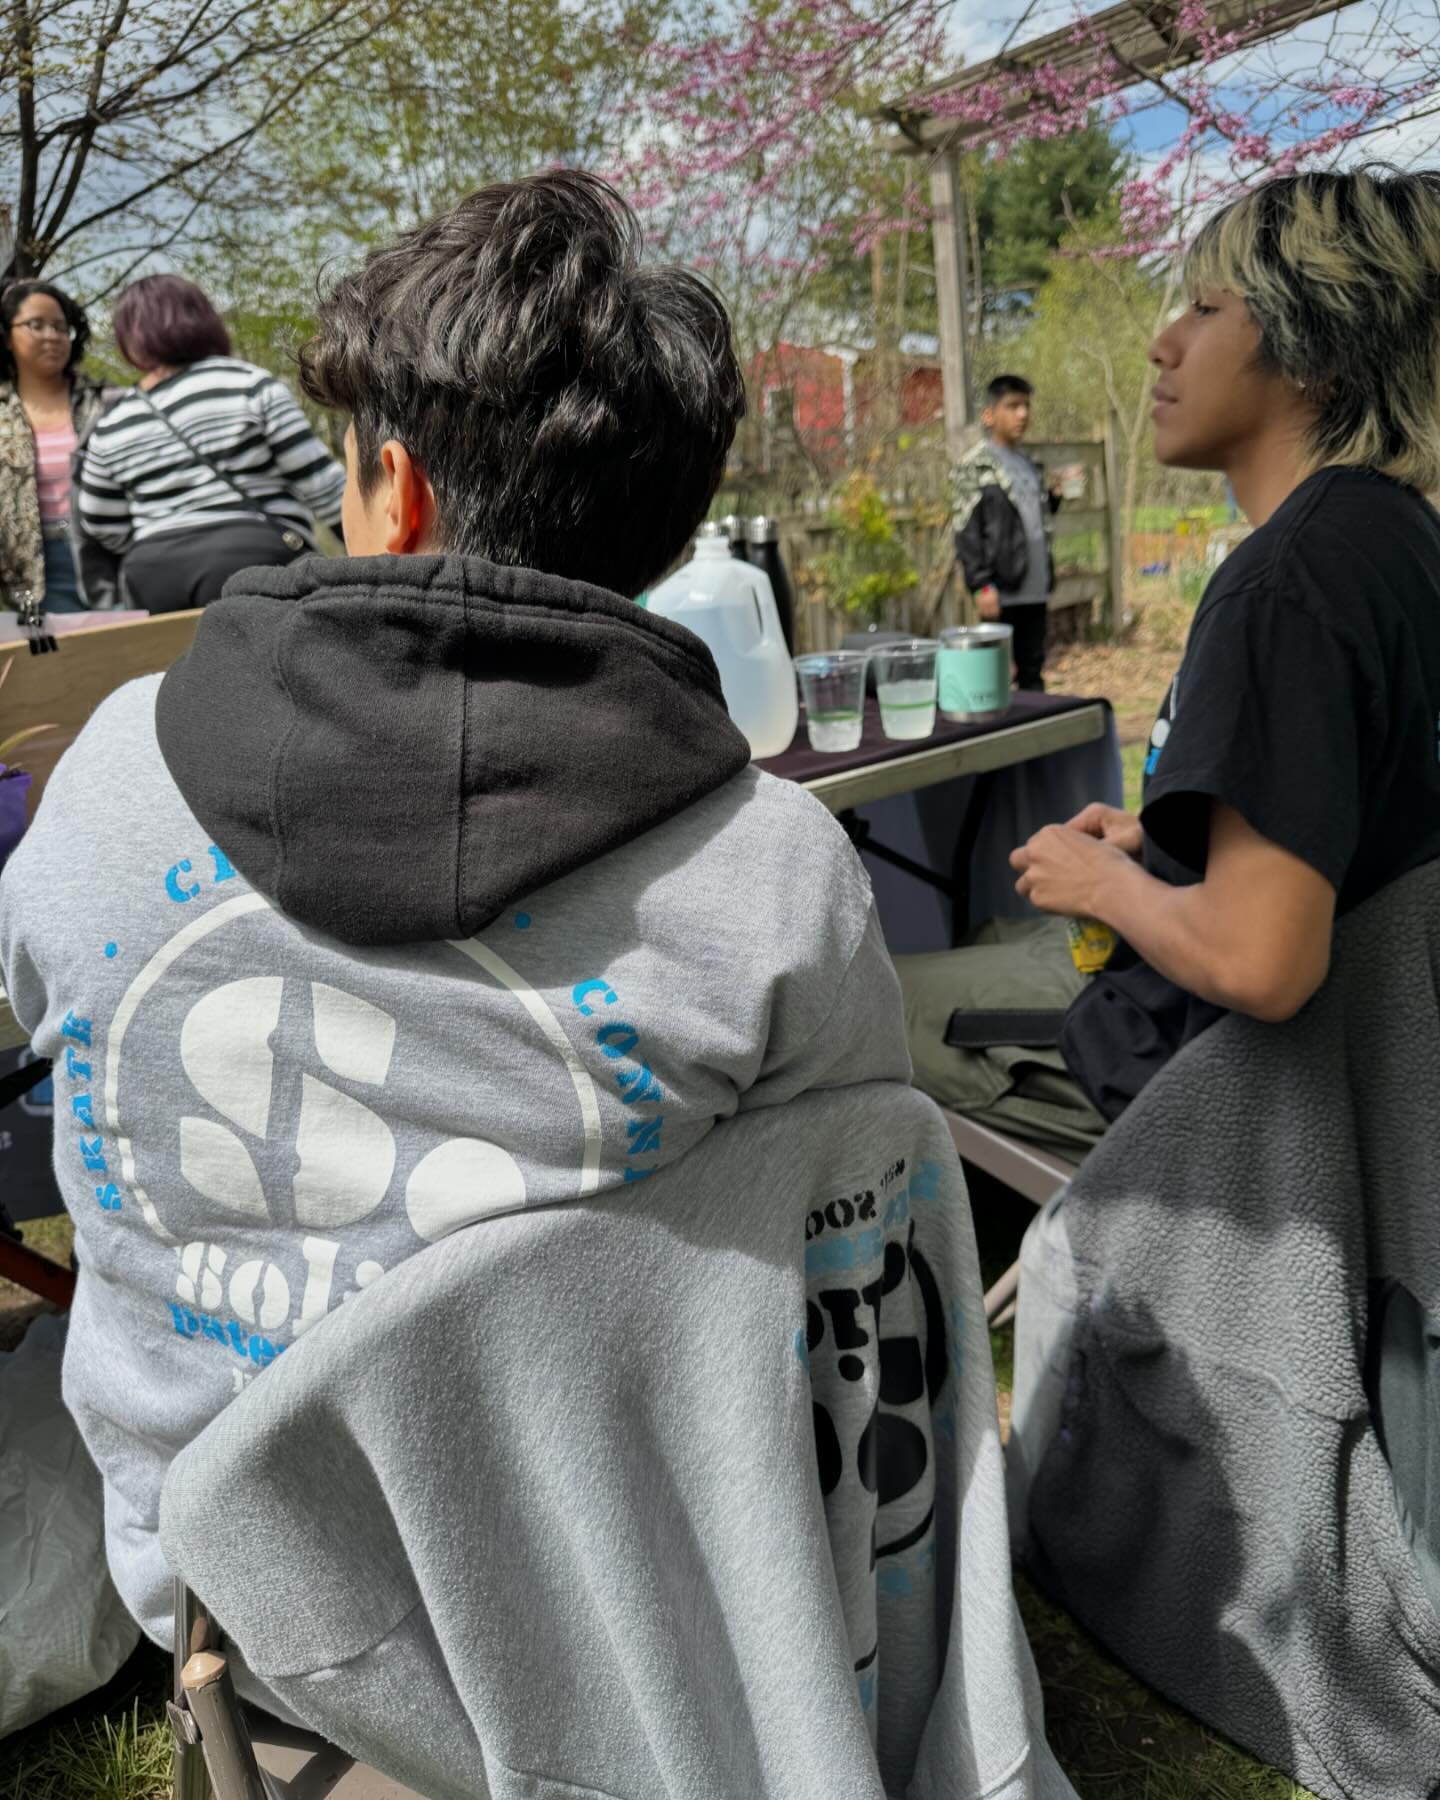 Earth Day Festival Recap ✨🌎 @citygreennj
We're so grateful to be apart of such an amazing event! Our booth was buzzing with art, ollie lessons, and interest in our mission at SOLID. Anyone who signed up for our automated messaging system entered int